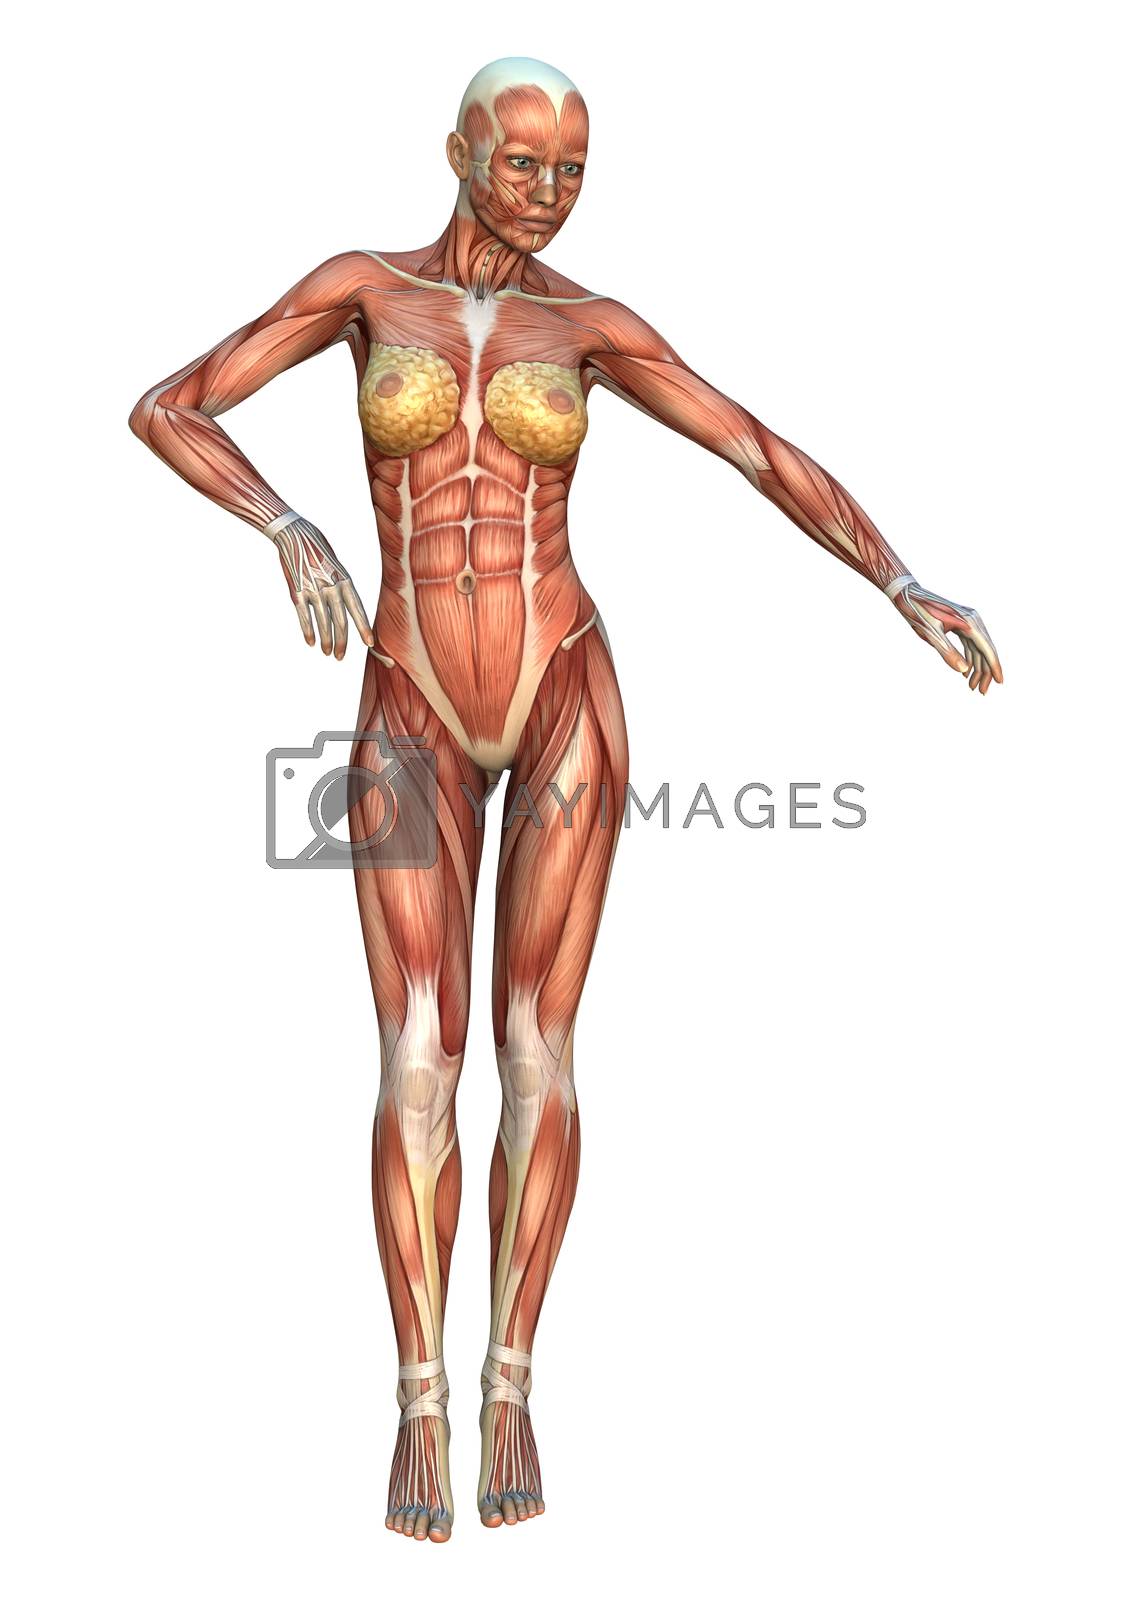 Royalty free image of Muscle Maps by Vac